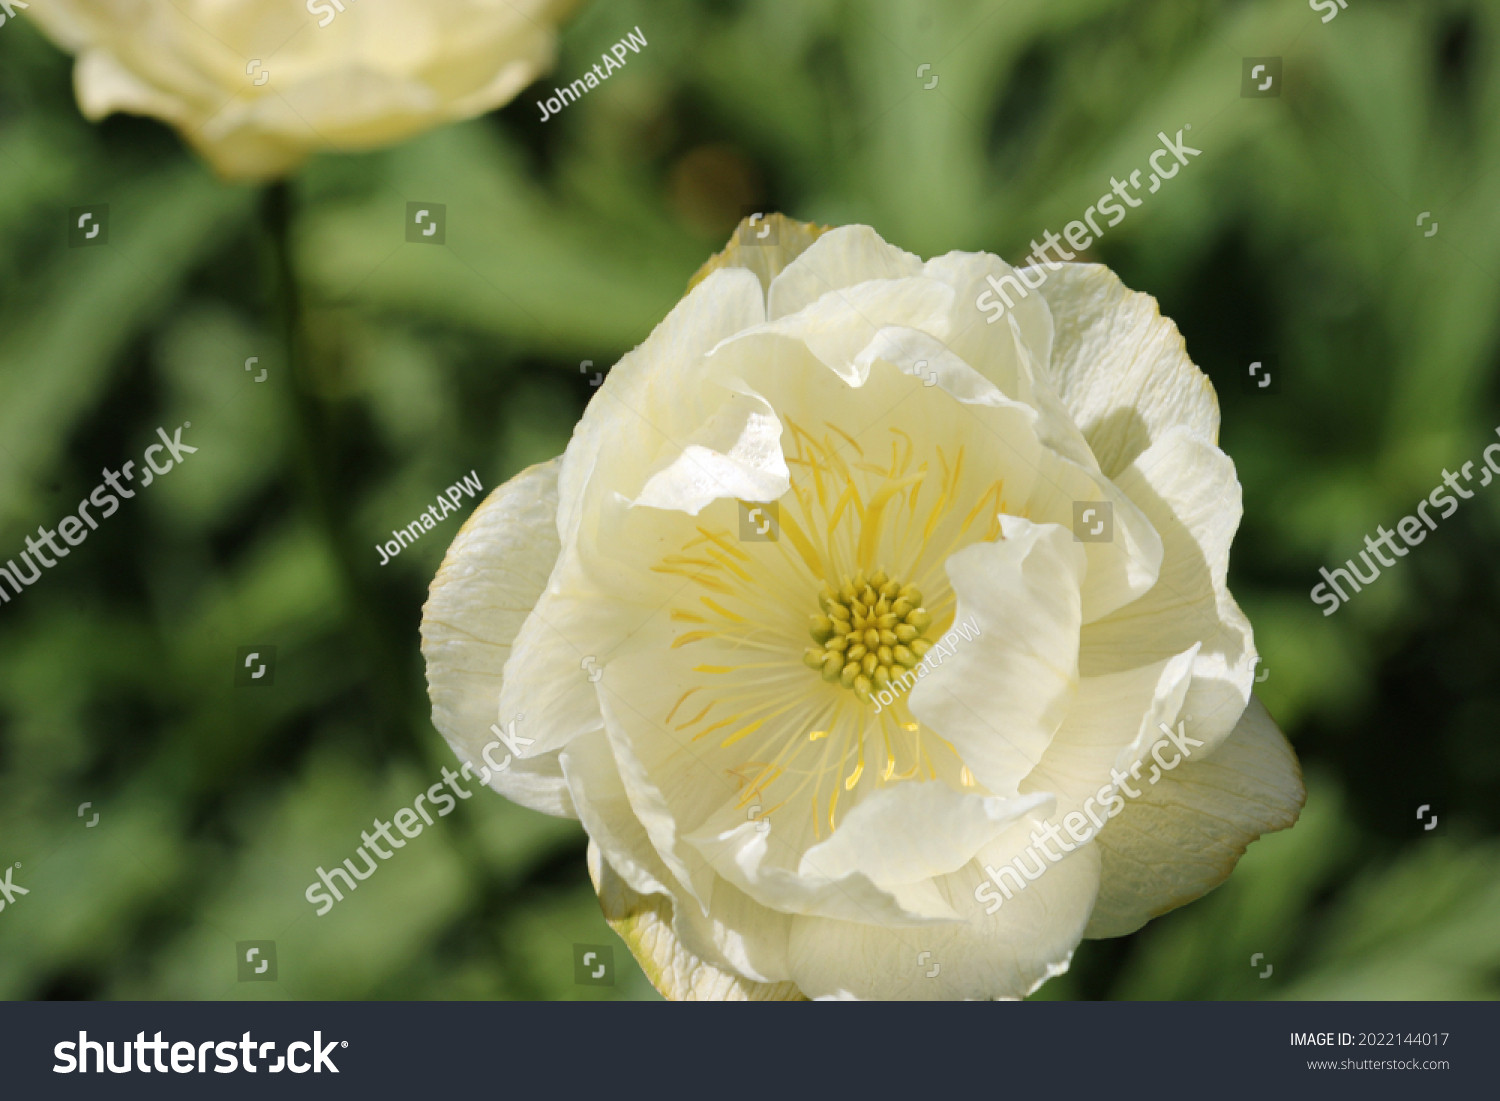 Pale yellow hybrid globeflower, Trollius x cultorum variety Alabaster, flower in close up with a background of blurred leaves and flowers. #2022144017